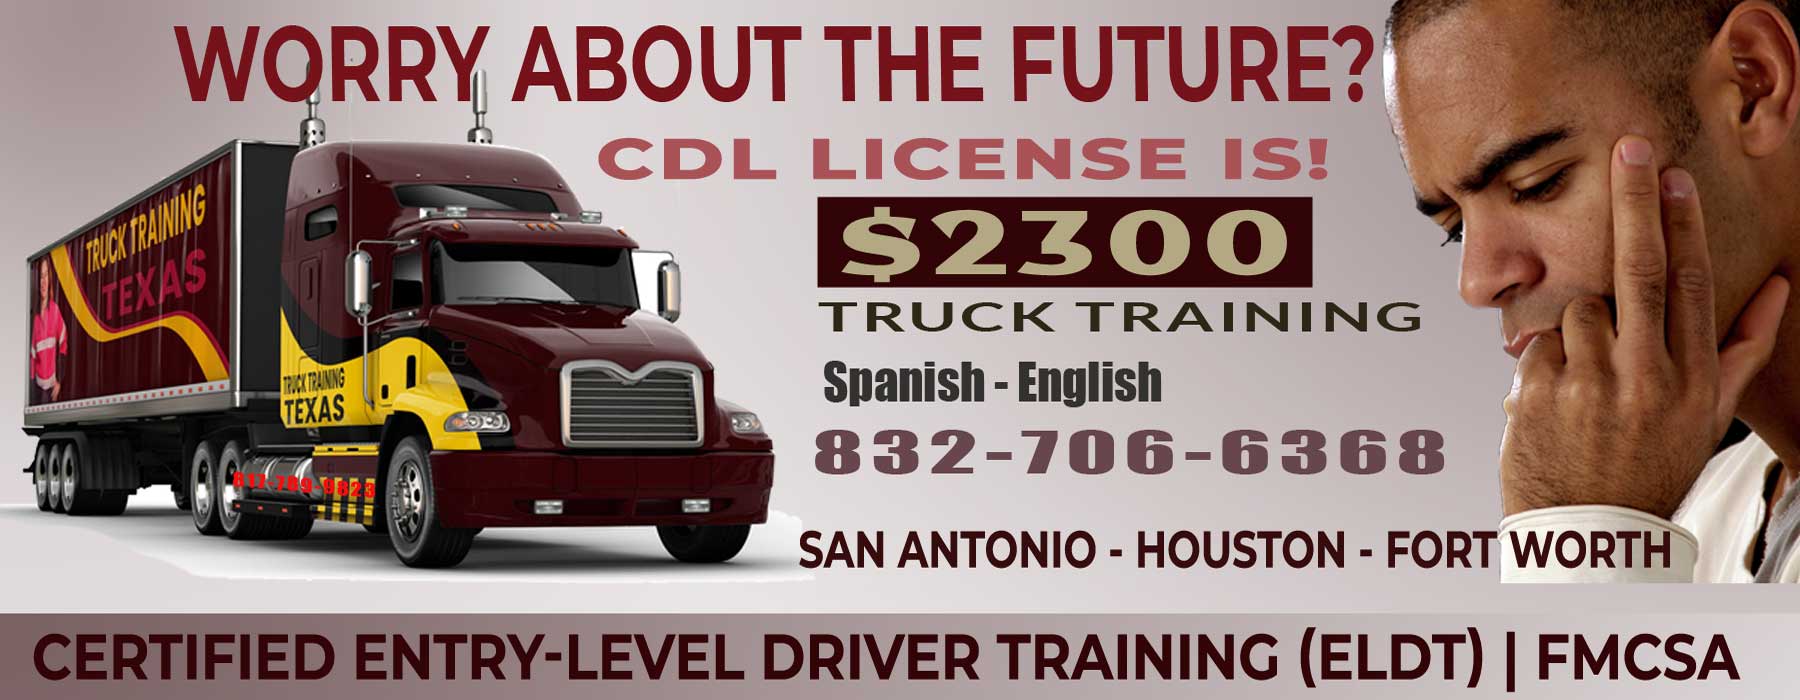 CDL School San Antonio TX, image show phone number and truck